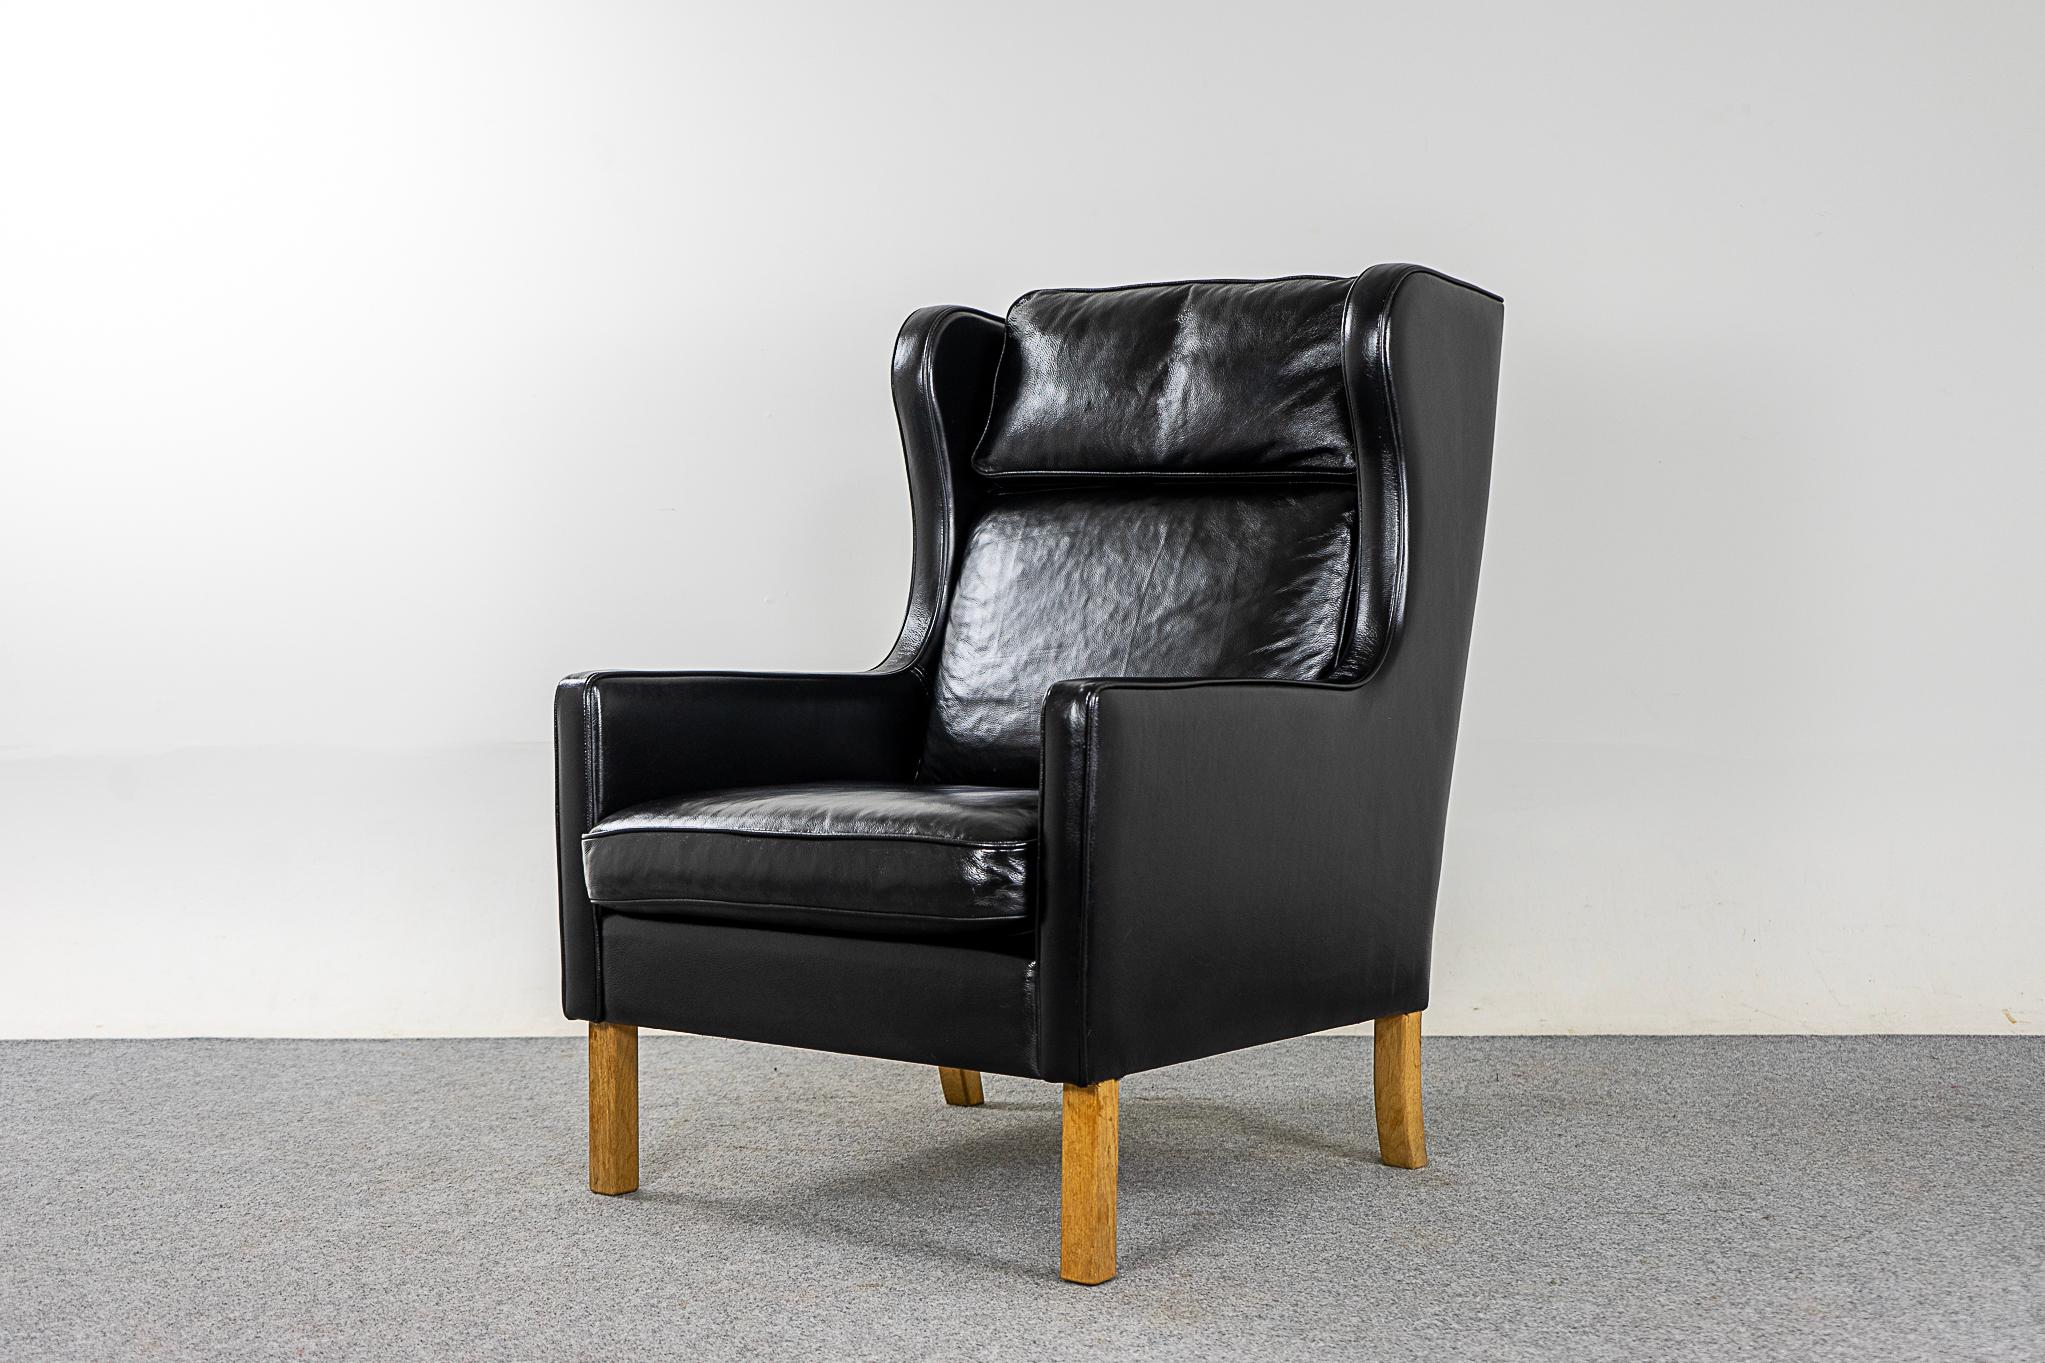 Leather Danish modern pitch black wingback lounge chair, circa 1960's. Classic high back provides support for your neck, sit back and relax! Contrasting wood legs, a nice touch.

Please inquire for international shipping rates.